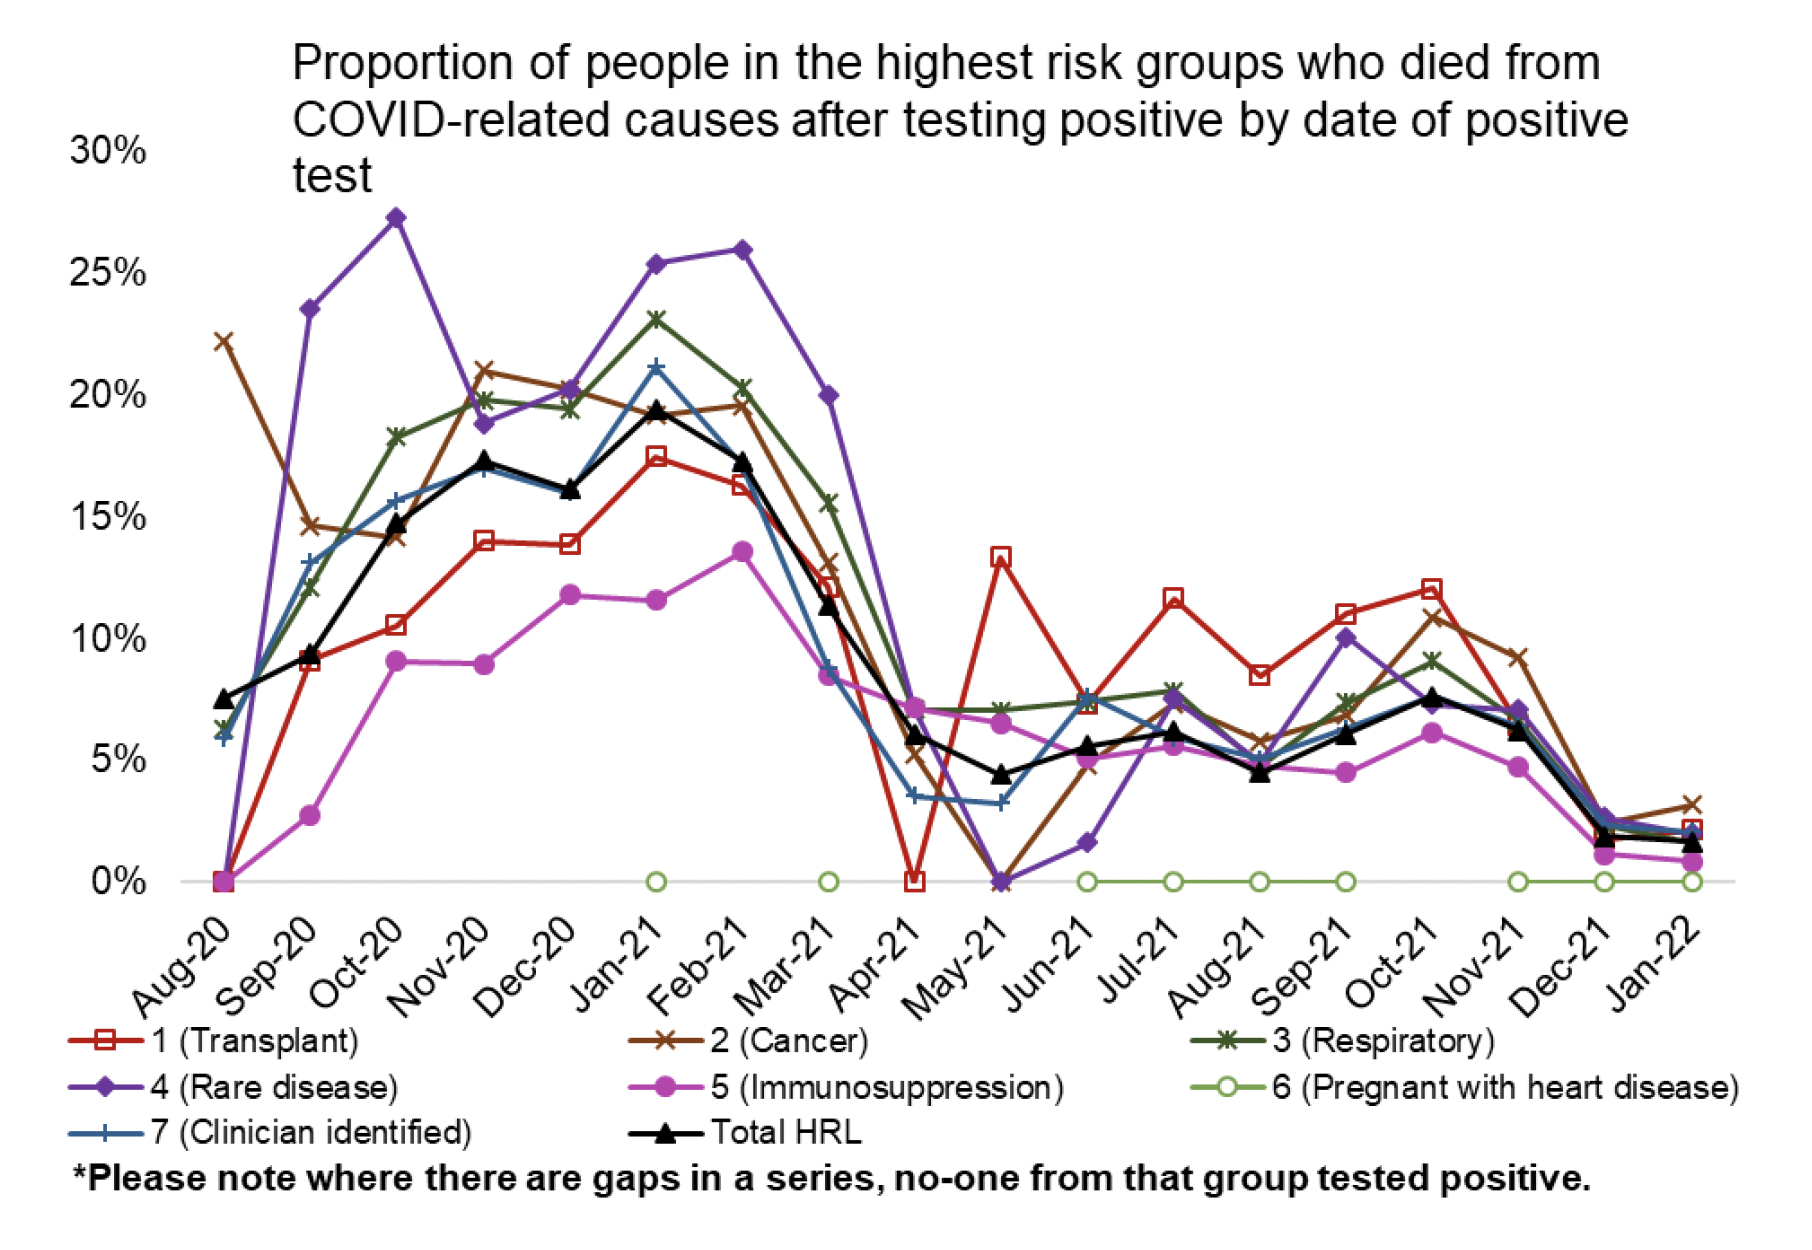 Figure 4 shows the percentage of COVID-related deaths in the Highest Risk List following positive tests. The proportion of people on the Highest Risk List dying of COVID-related causes within 28 days after a positive test fell from a high of 19% in January 2021 to 6% by April 2021 and it remained around this level until December 2021 when it dropped further to 2% (the lowest in the time series).